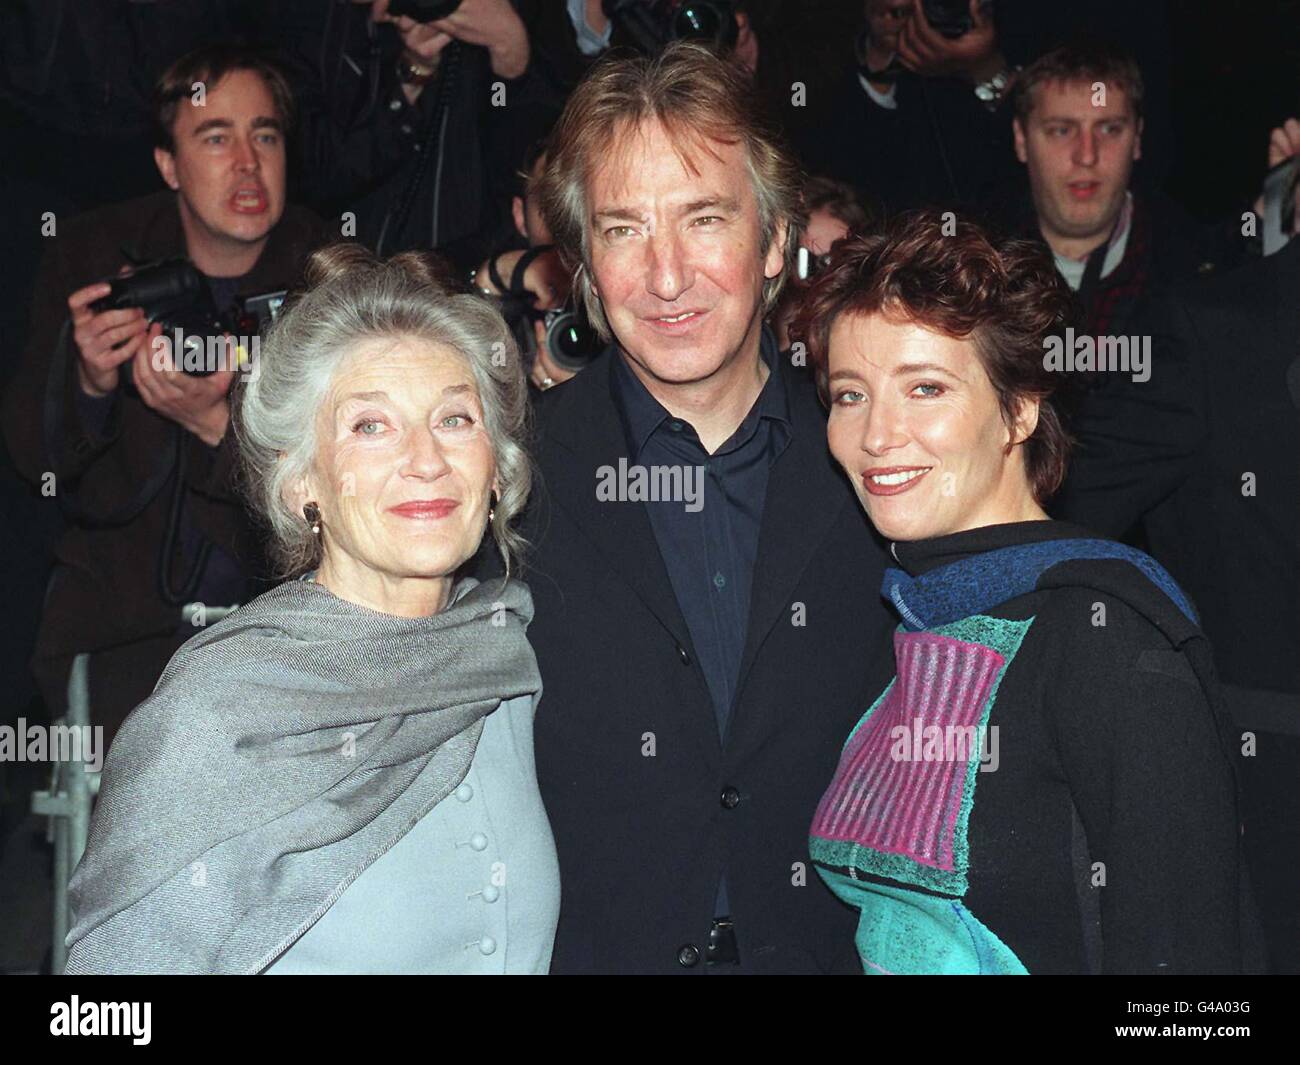 Oscar-winning actress Emma Thompson (right) and her mother Phyllida Law, with Alan Rickman at tonight's (Thursday) preview screening of his directorial debut, 'The Winter Guest', in which the pair star as mother and daughter. The film, written by Scottish author Sharman Macdonald, is based on the experiences of Scots-born actress Lindsay Duncan. See PA story SHOWBIZ Emma. Photo by Sean Dempsey/PA Stock Photo